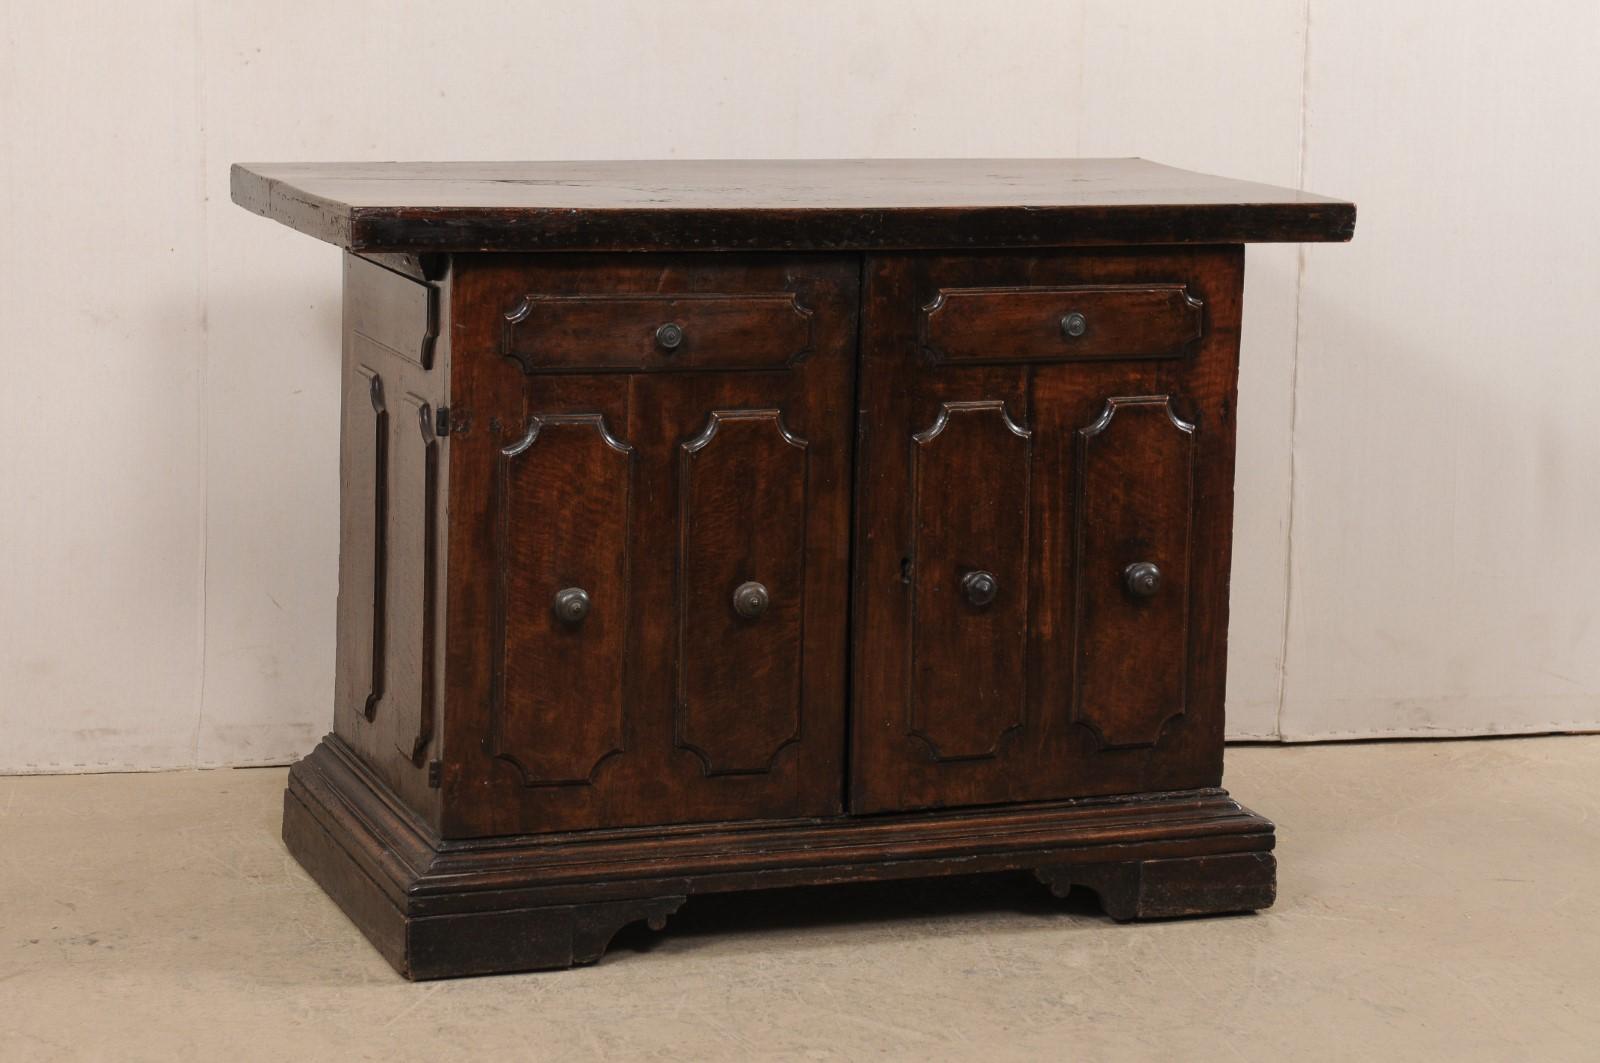 An Italian two-door walnut wood cabinet from the 18th century. This antique buffet from Italy, created from beautiful walnut wood, has a thick 2.25 inch top, is decorated about the front and each side with raised panels, and is raised upon a flat